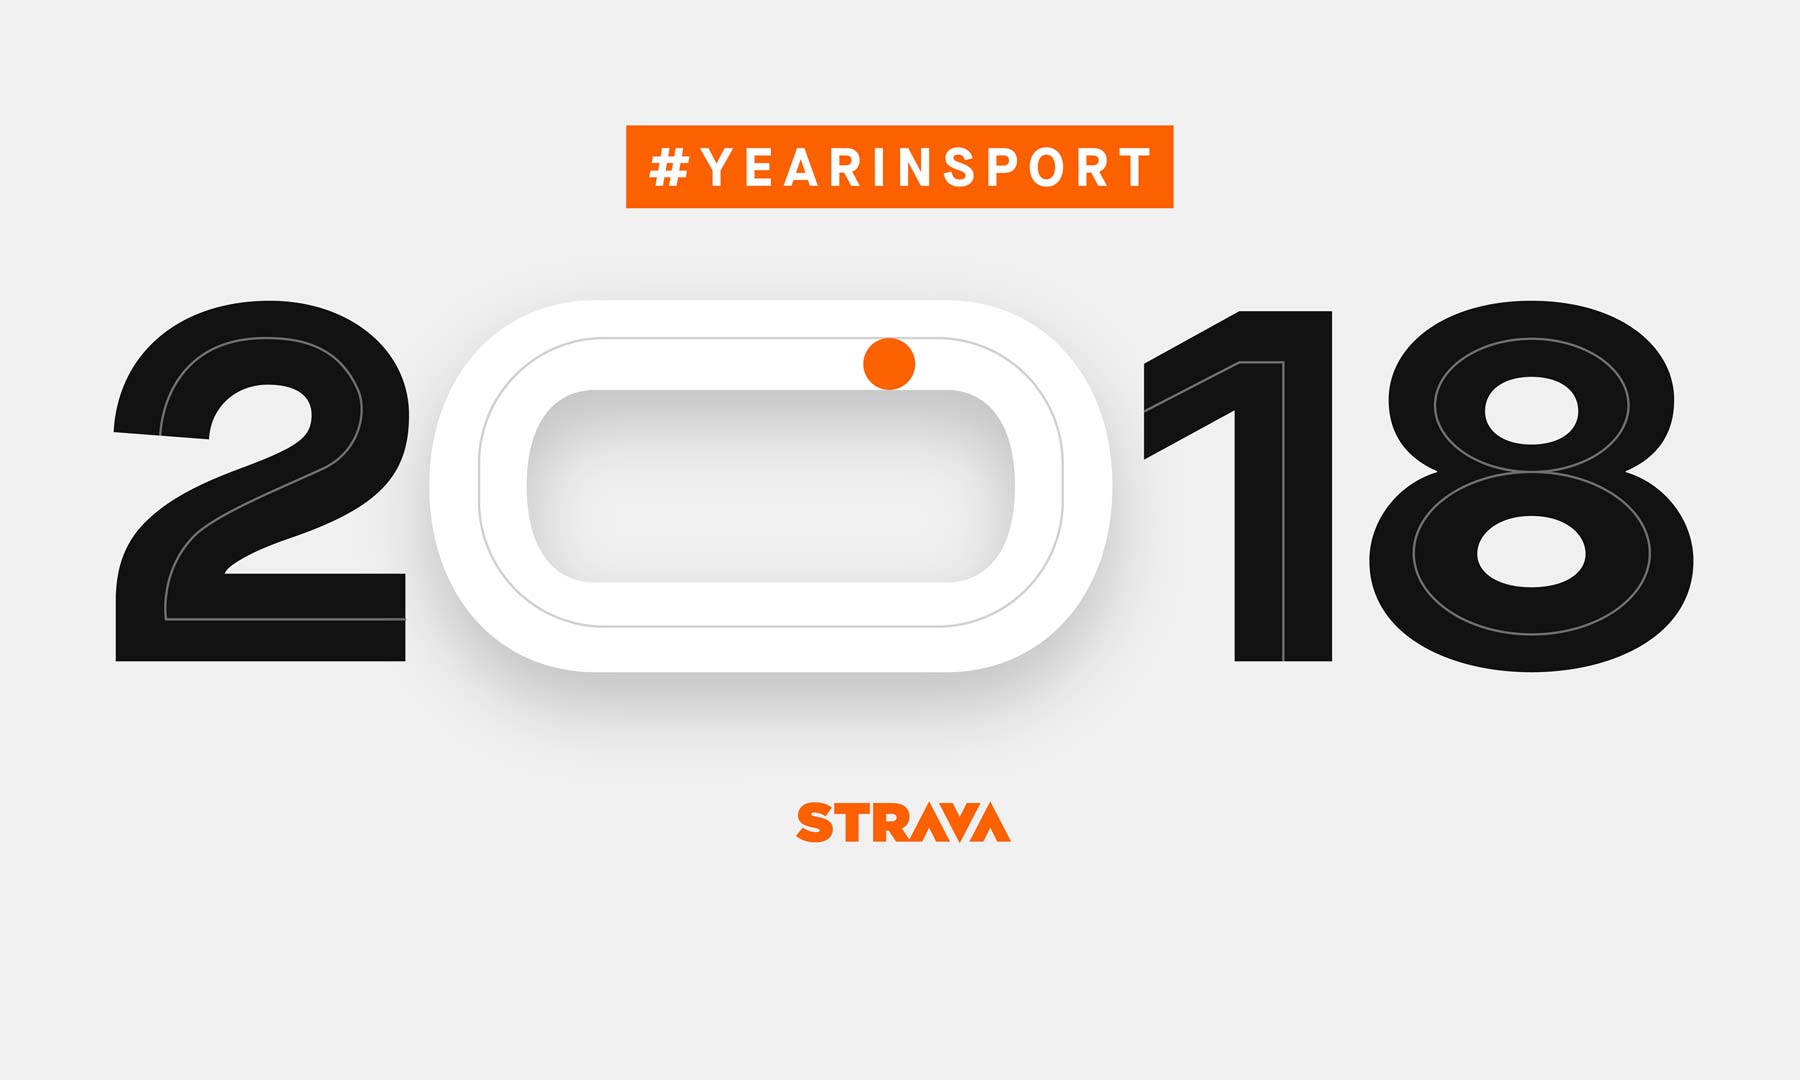 2018 Strava Year in Sport, a look back at the data collected, year in review activity summary